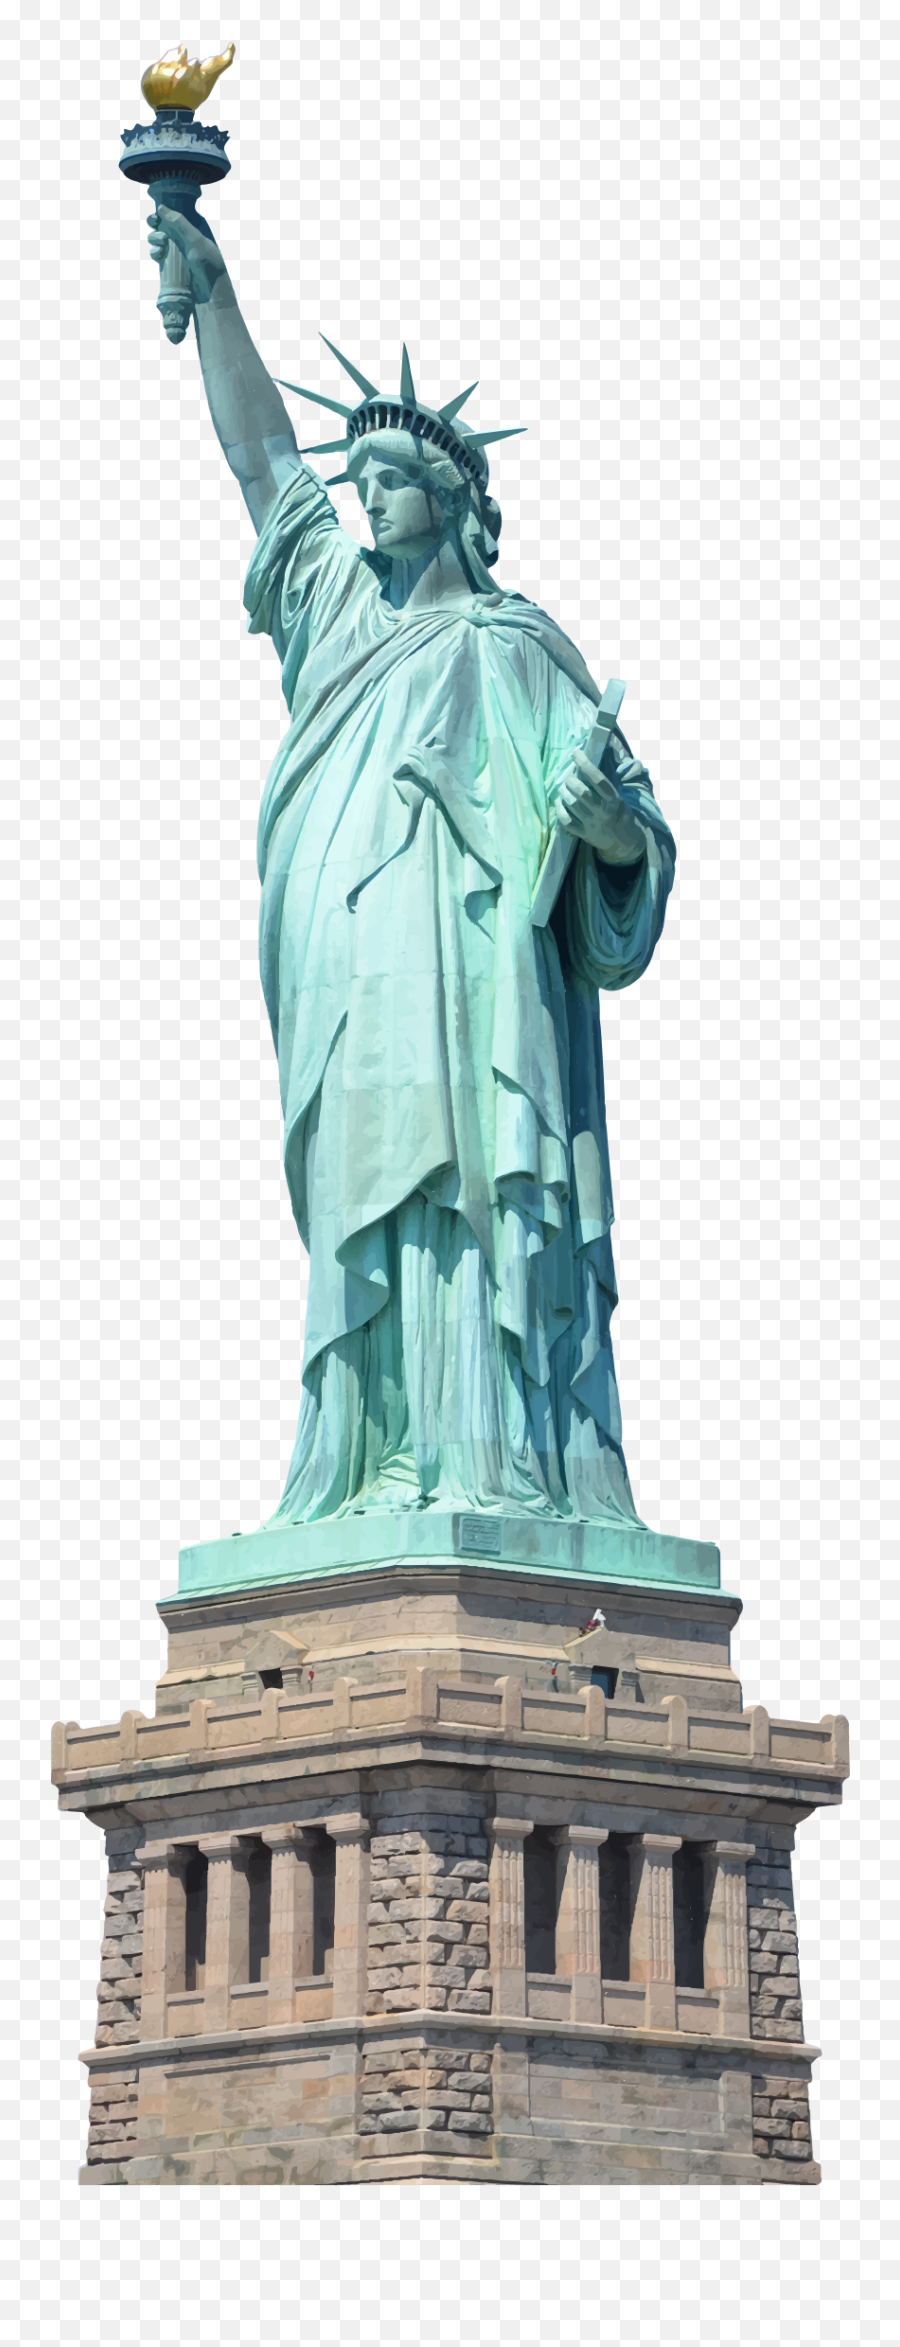 Clipart Statue Of Liberty - Statue Of Liberty Emoji,Statue Of Liberty Clipart